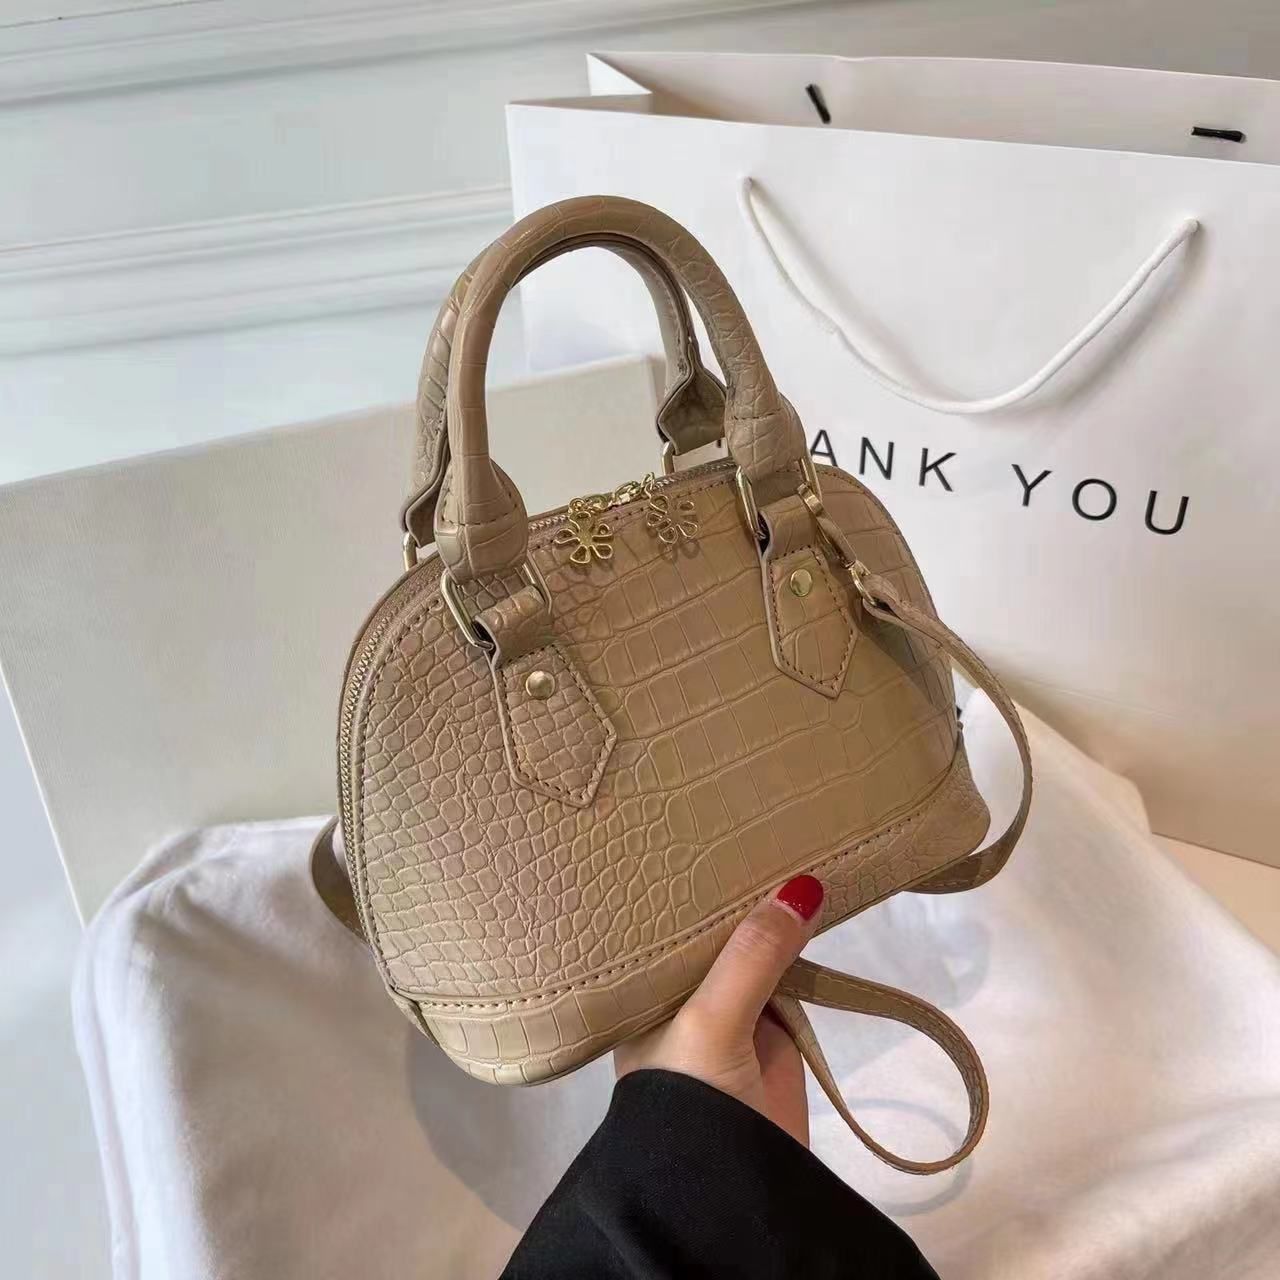 JT8699 MATERIAL PU SIZE L23XH15XW11CM WEIGHT 500GR COLOR KHAKI